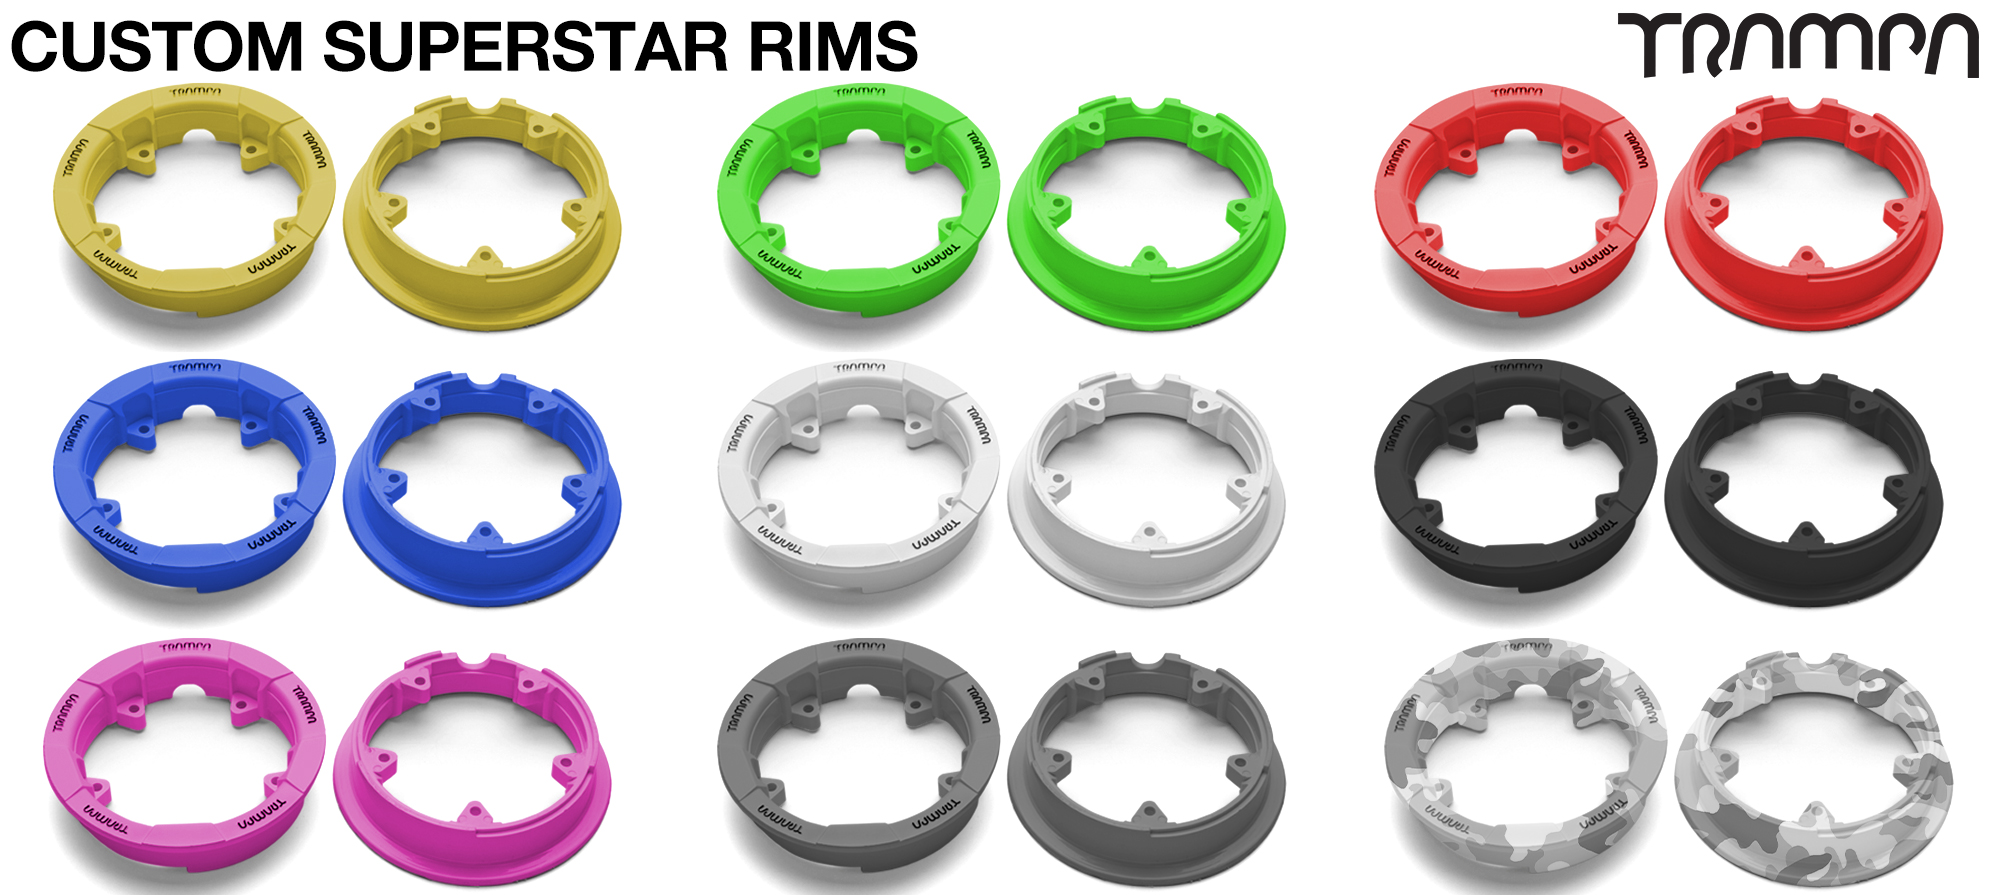 Set of 4 SUPERSTAR CENTER-SET Rims 3.75x 2 Inch fits CLASSIC Spokes & all 3.75 Inch Tyres - CUSTOM